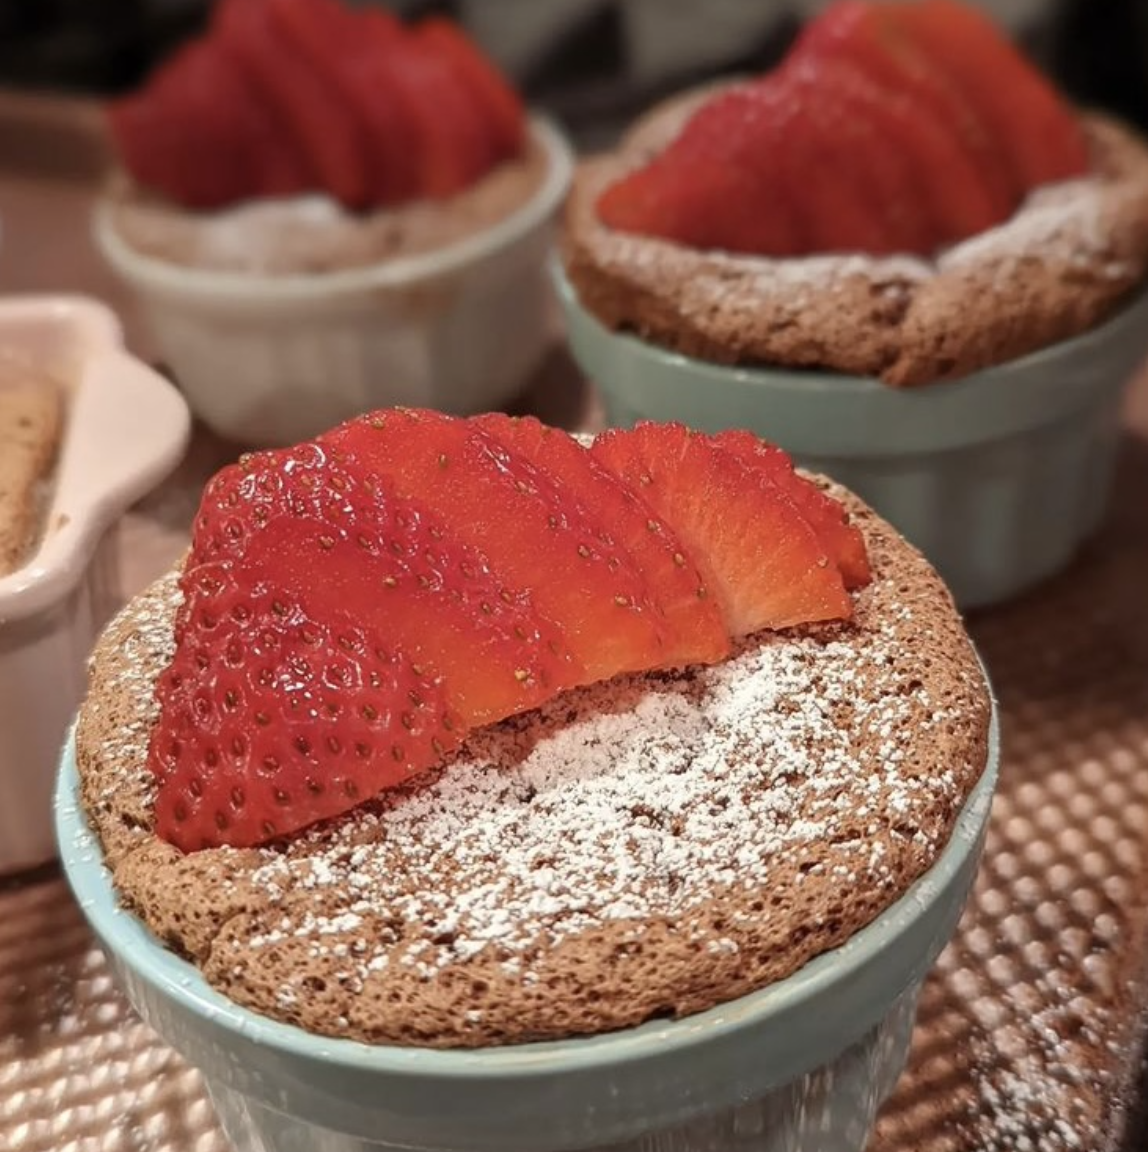 Chocolate Soufflé with strawberries at Cams 